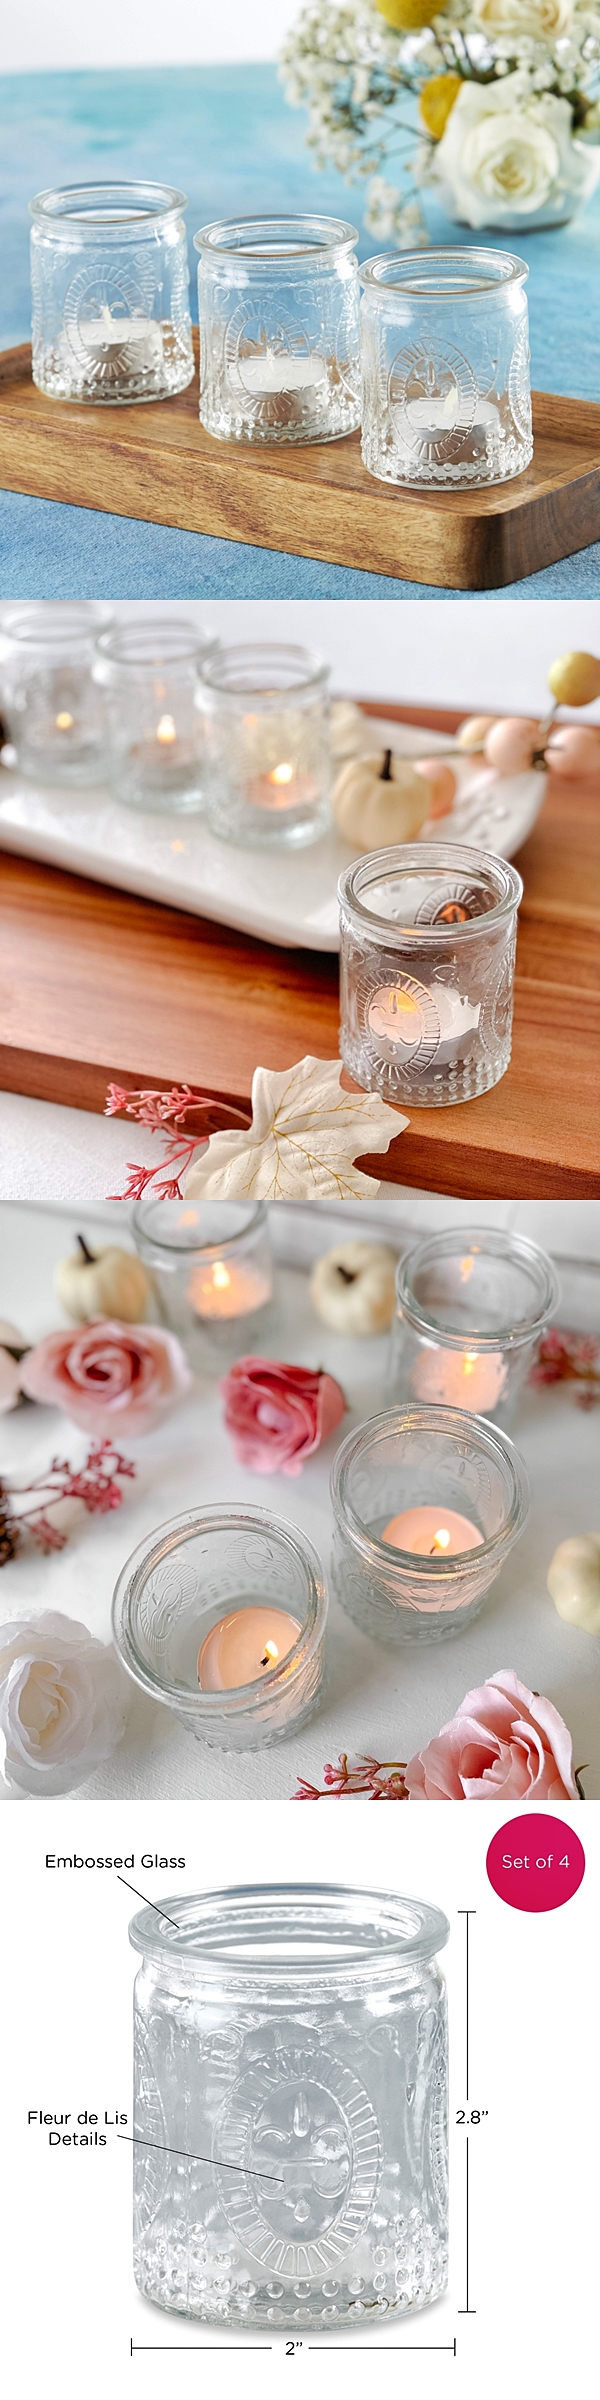 Vintage-Design Embossed Clear Glass Tealight Candle Holders (Set of 4)